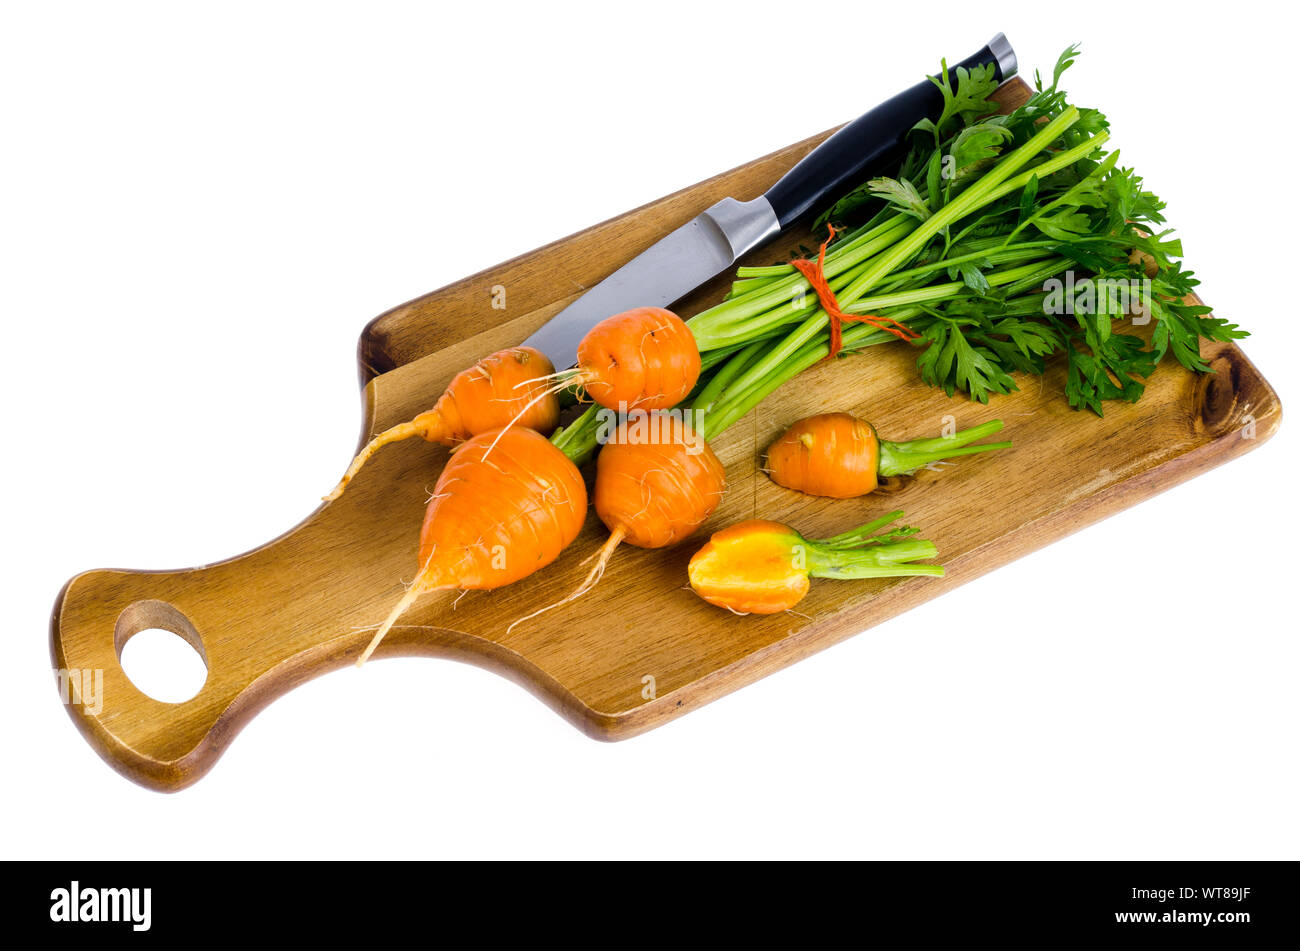 Bunch of small, round carrots (Parisian Heirloom Carrots) on wooden background. Studio Photo Stock Photo